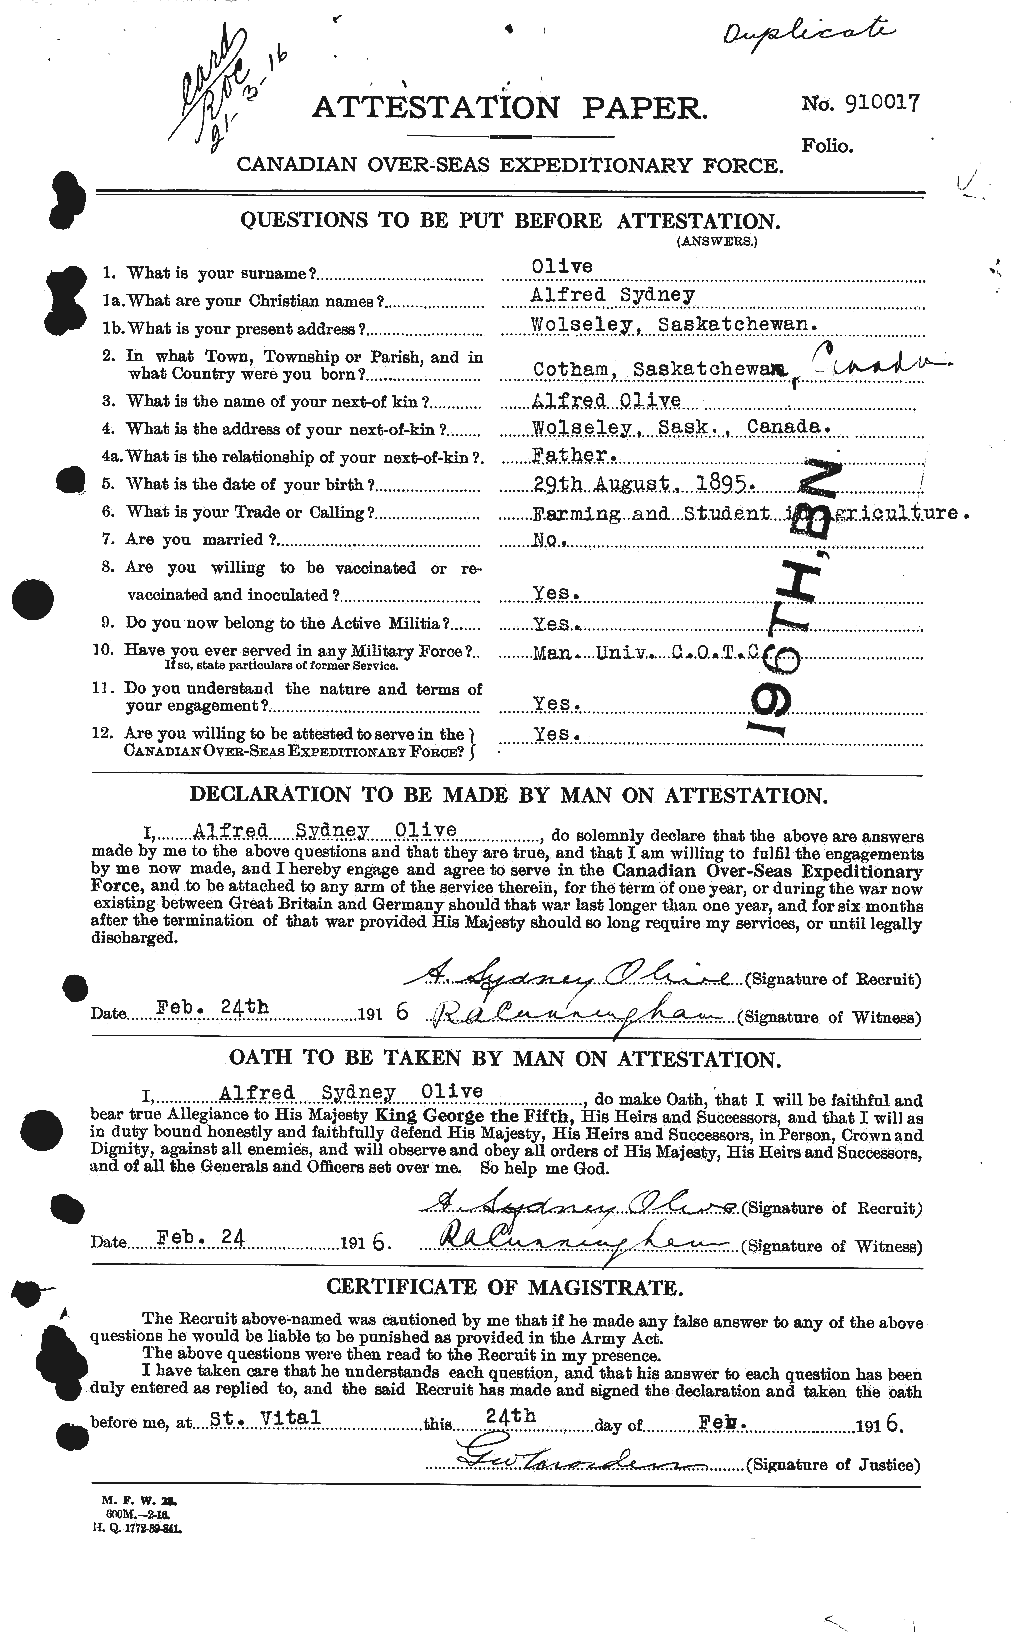 Personnel Records of the First World War - CEF 557075a